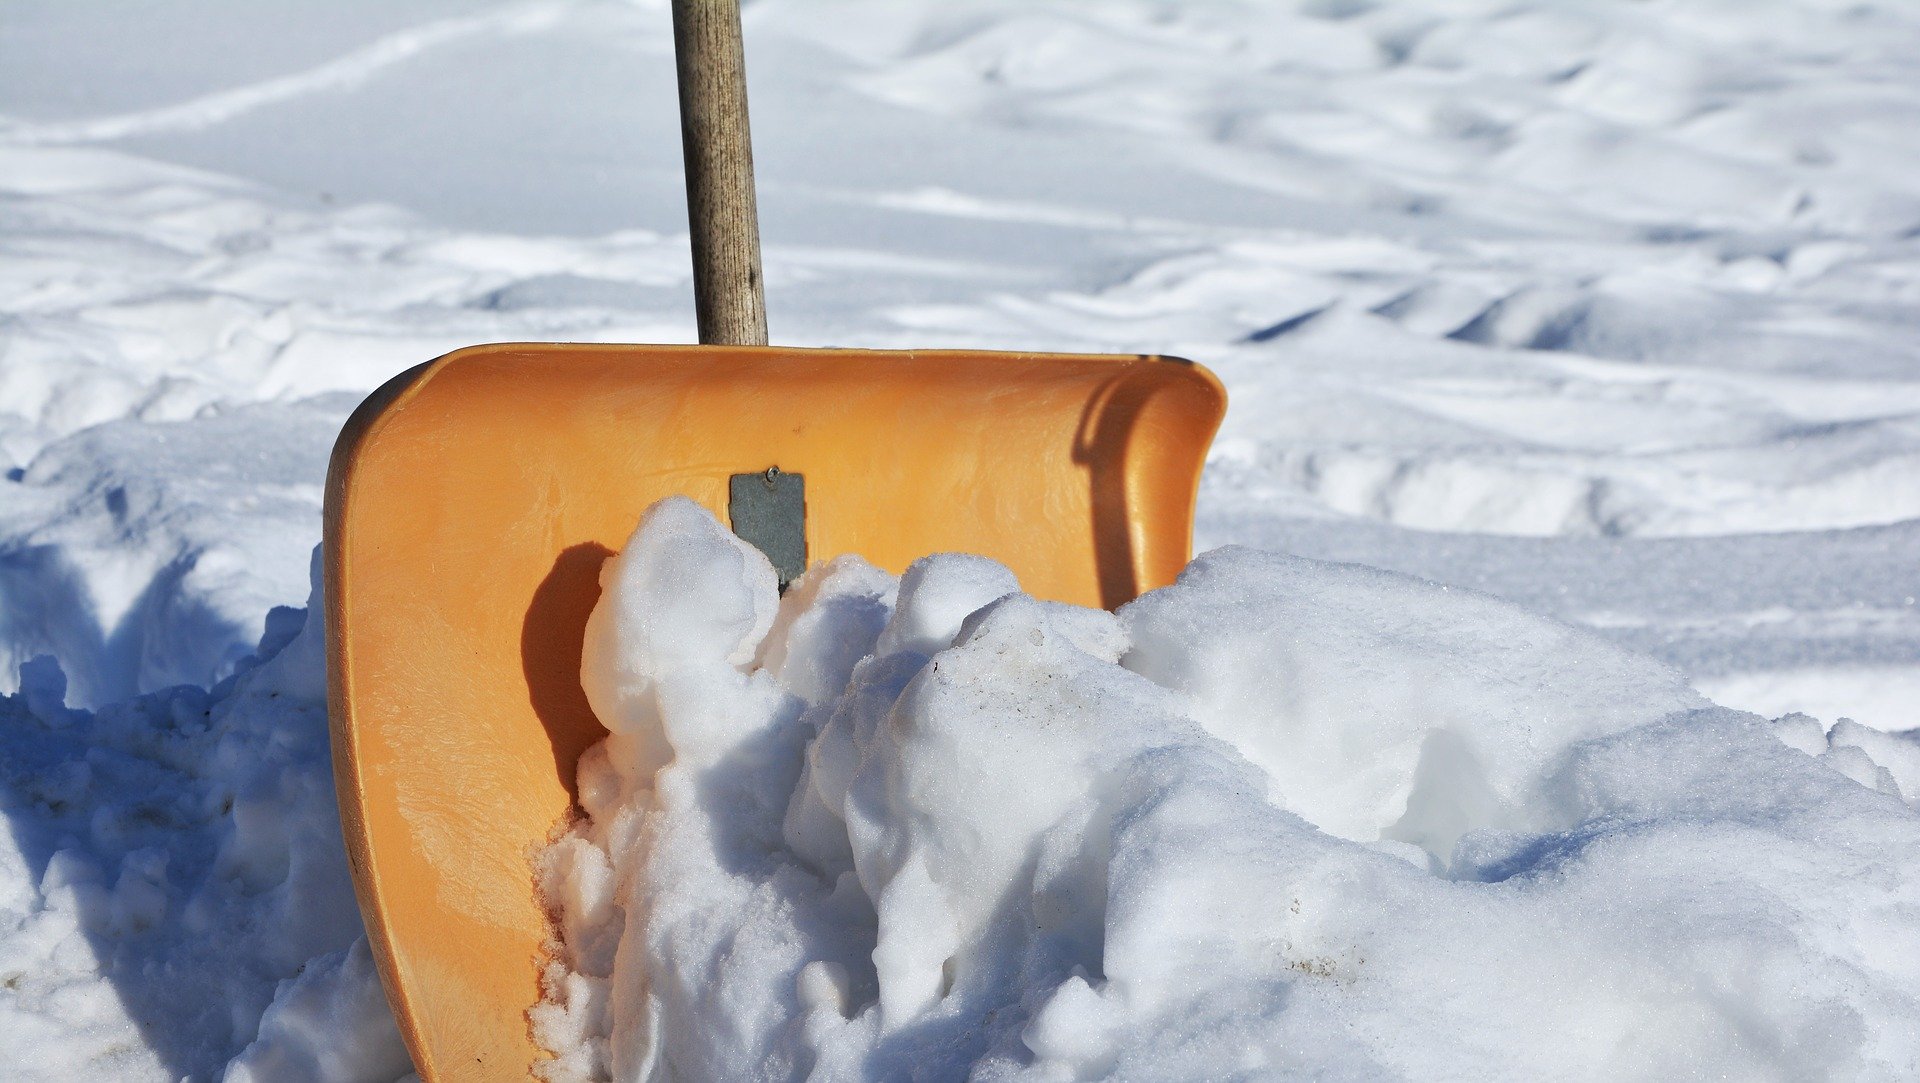 Snow shovel upright in snow bank.